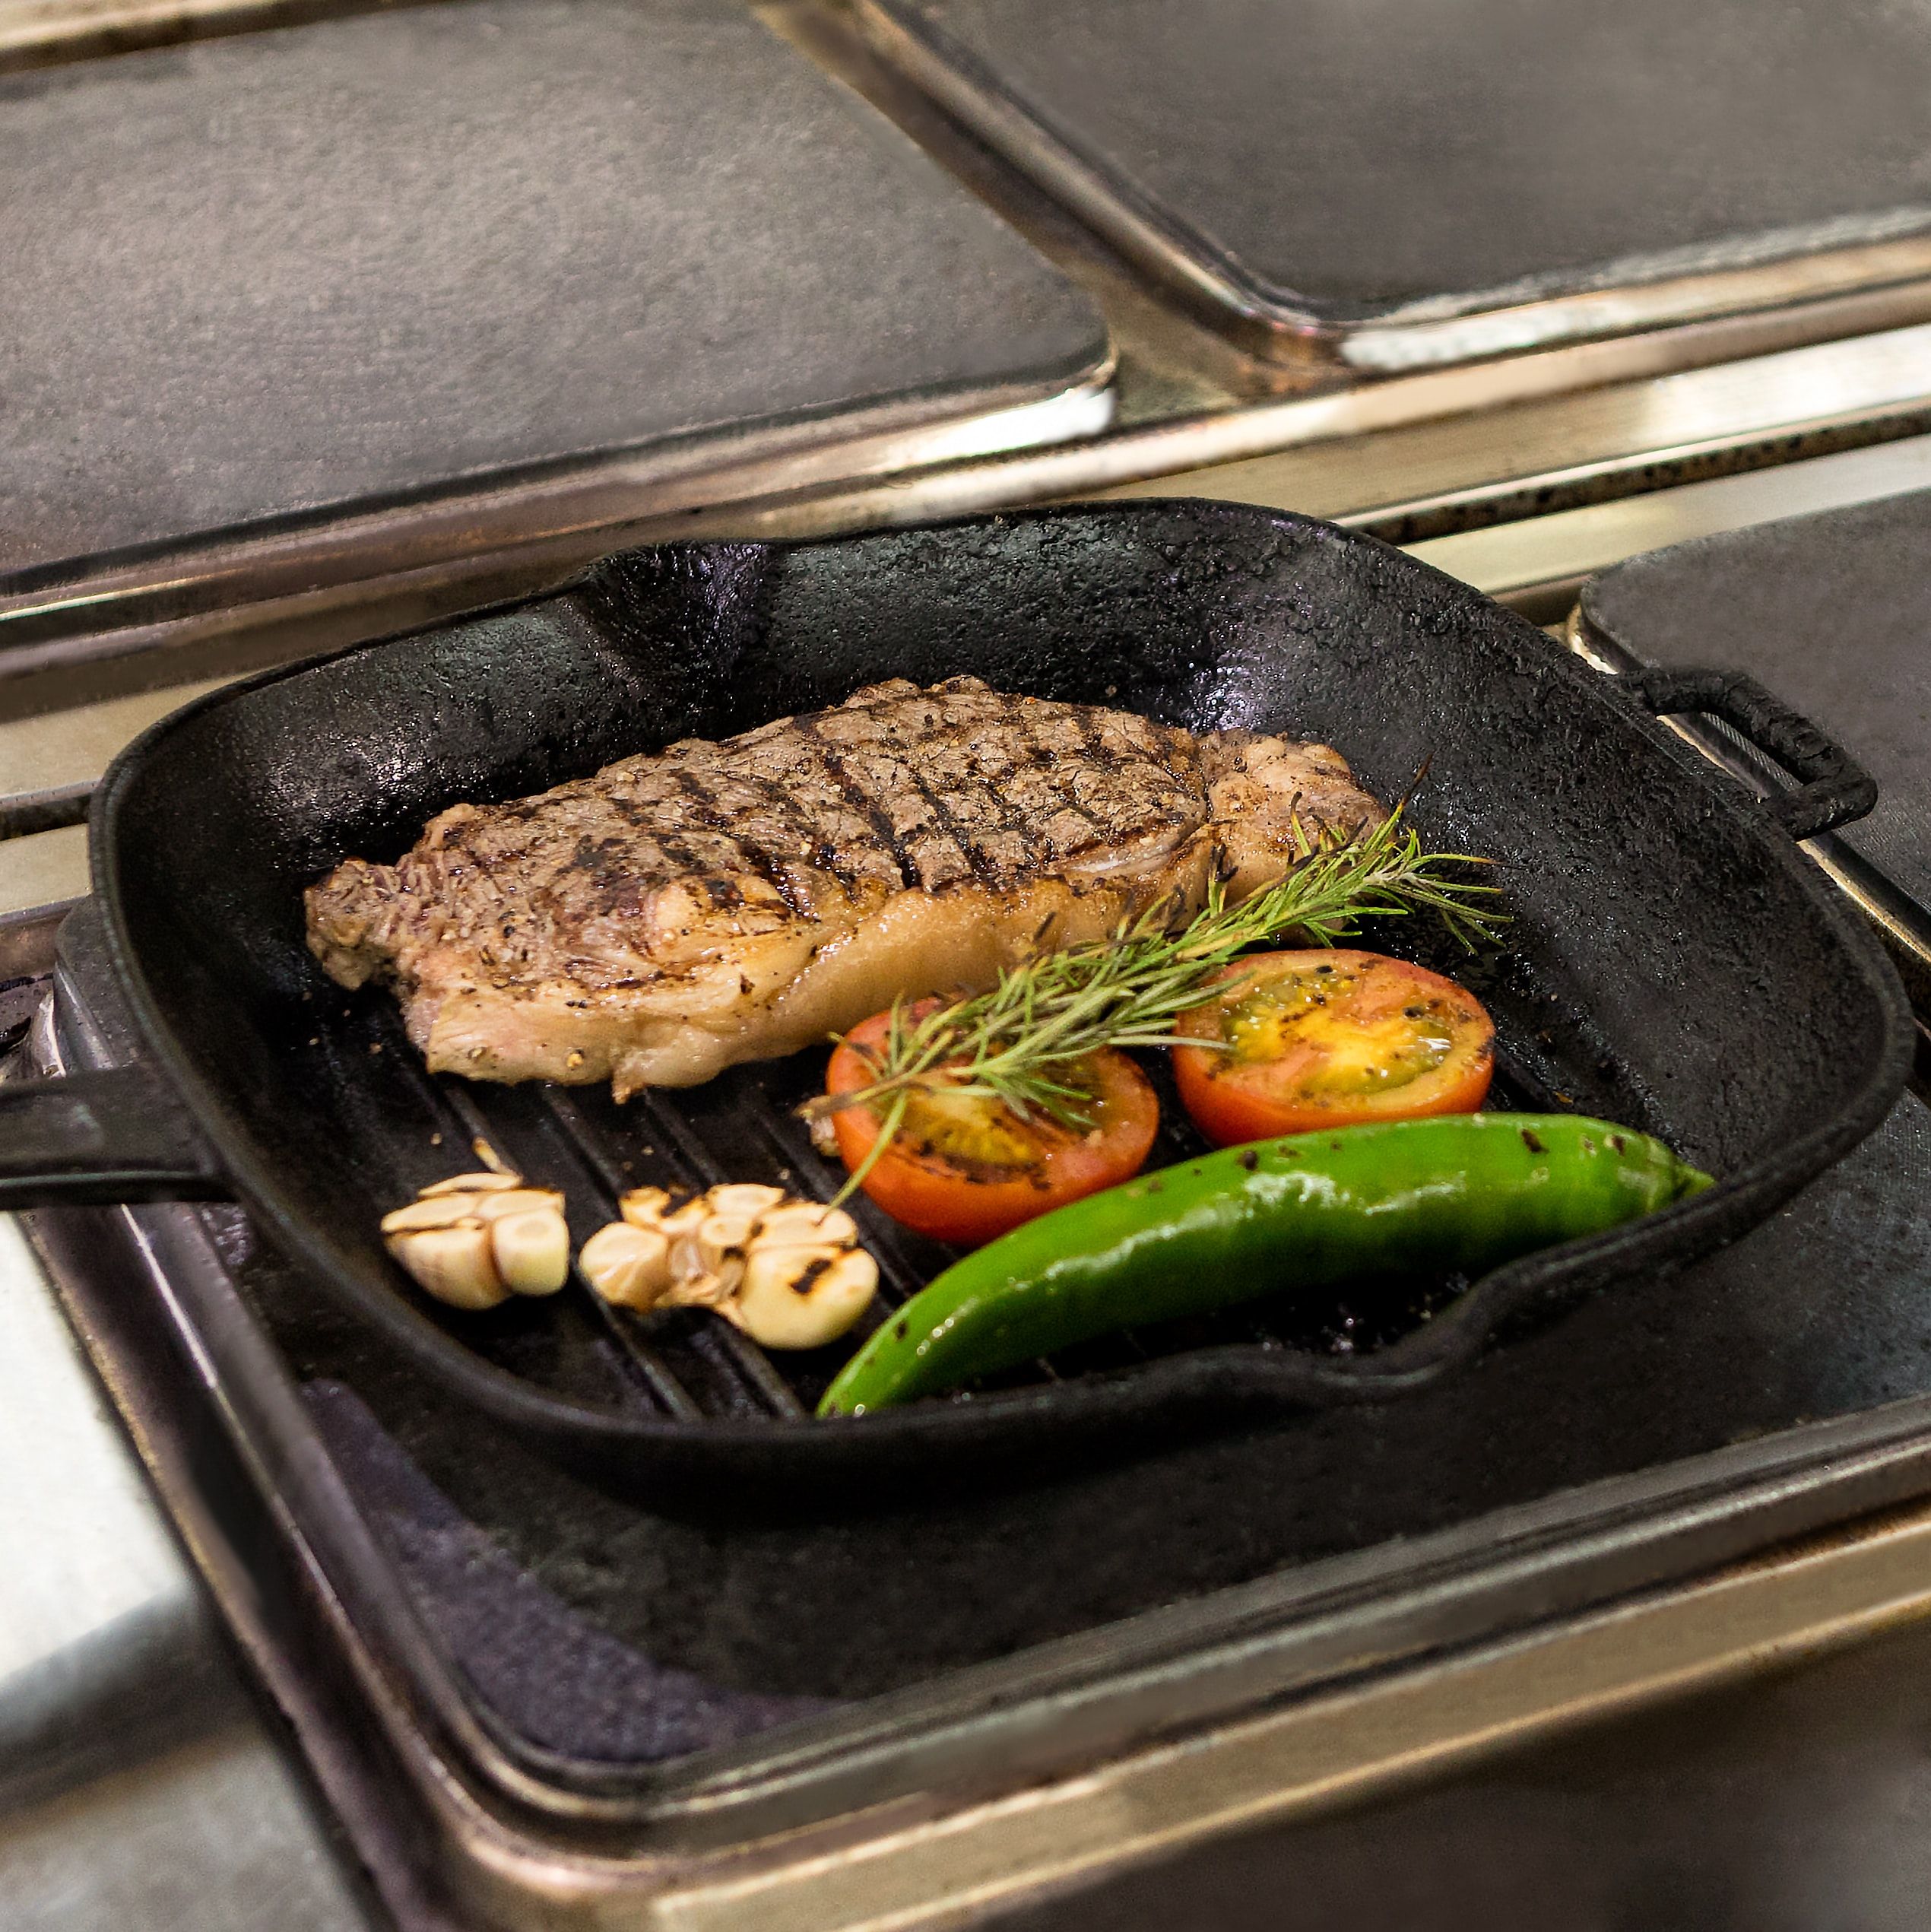 Grilling pan with meat and veggies on it